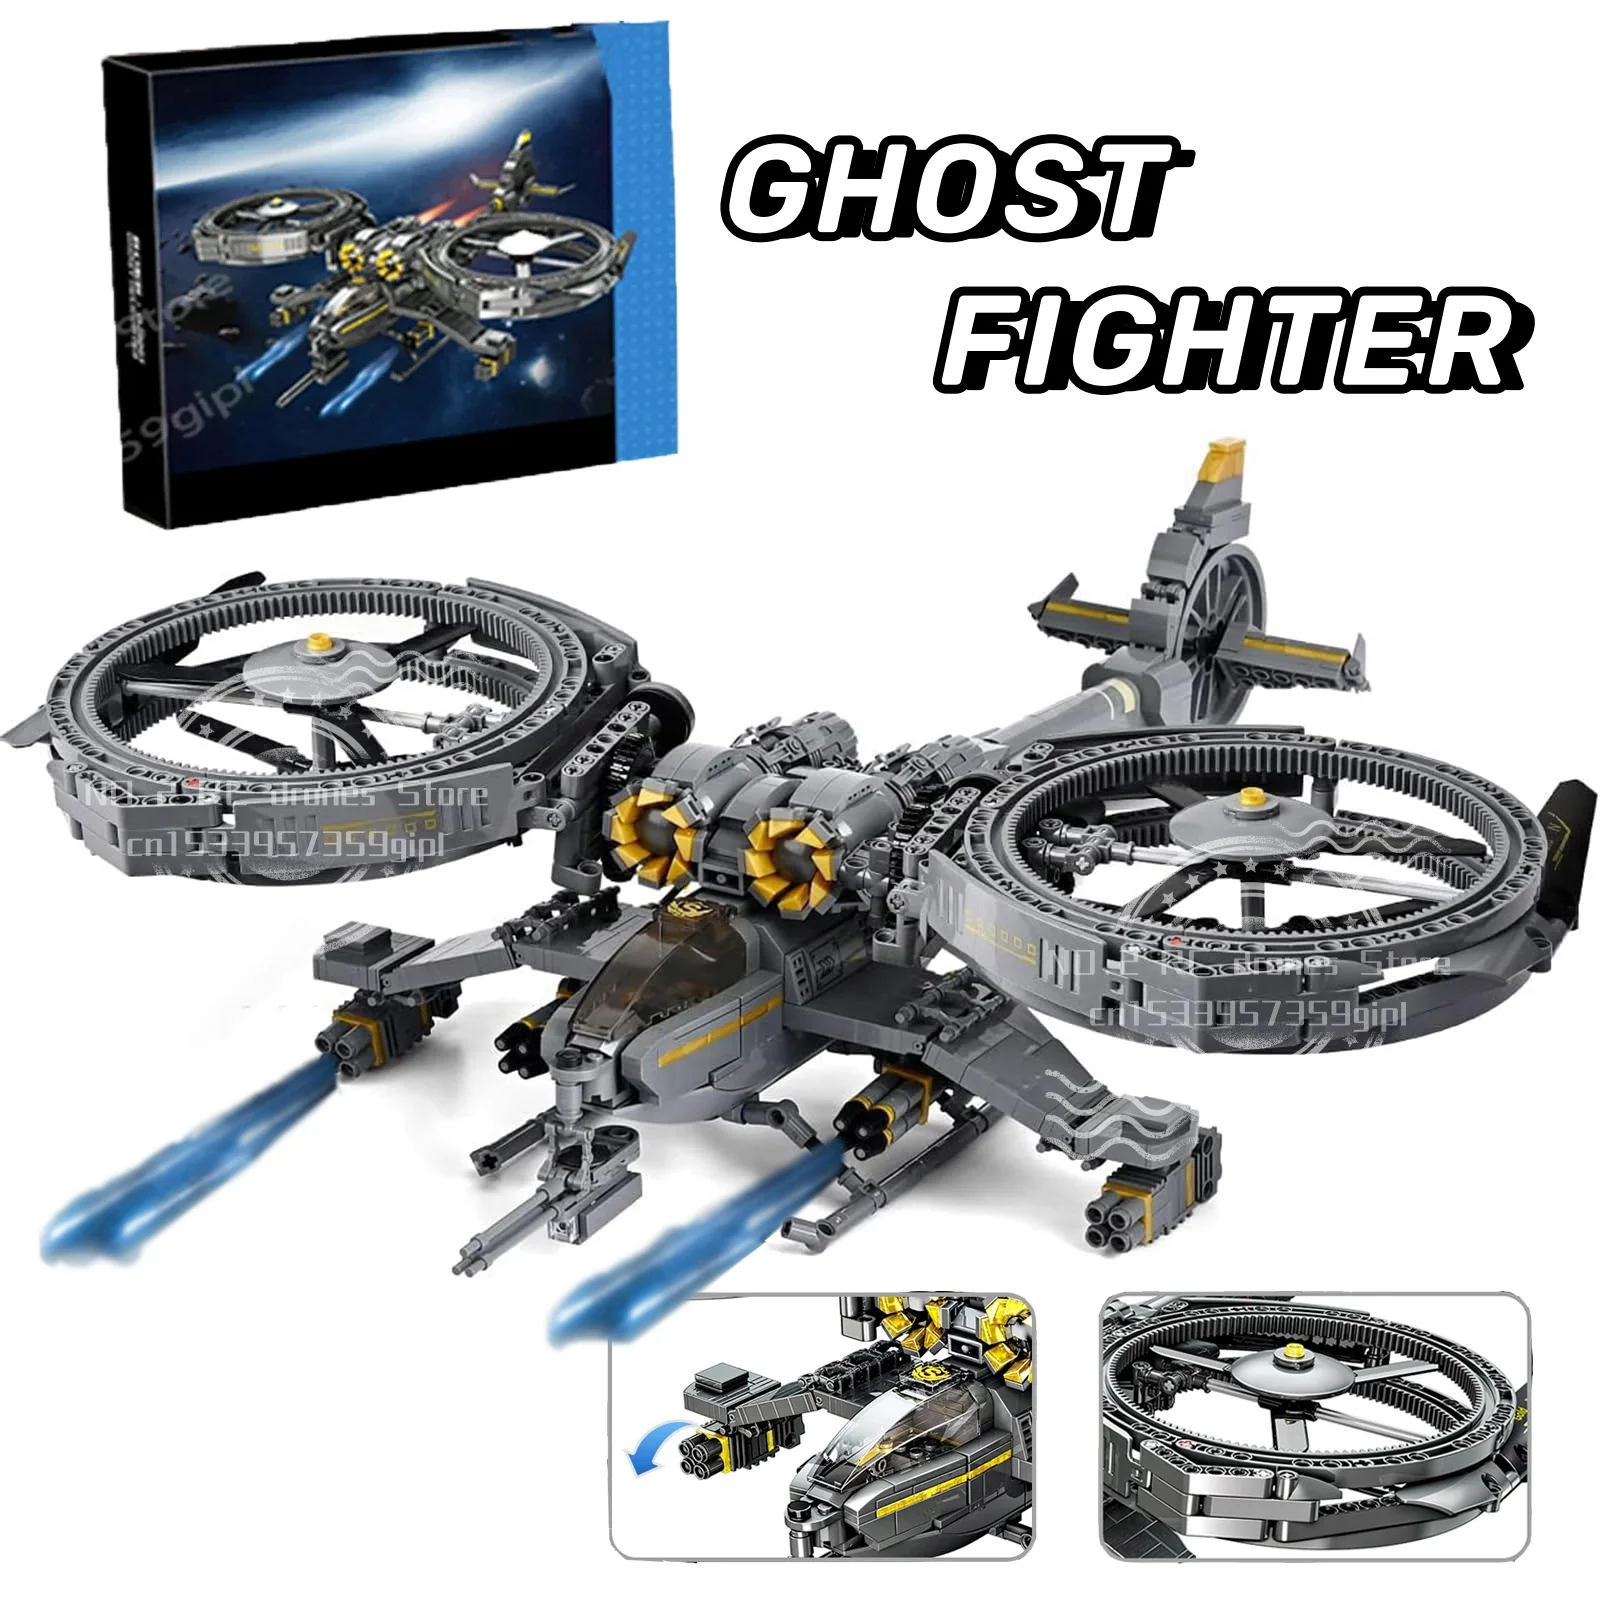 

Military Ghost Fighter Building Blocks Diy Helicopter Cosmic Model Decoration War Airplane Bricks Boys Toy for Children's Gifts